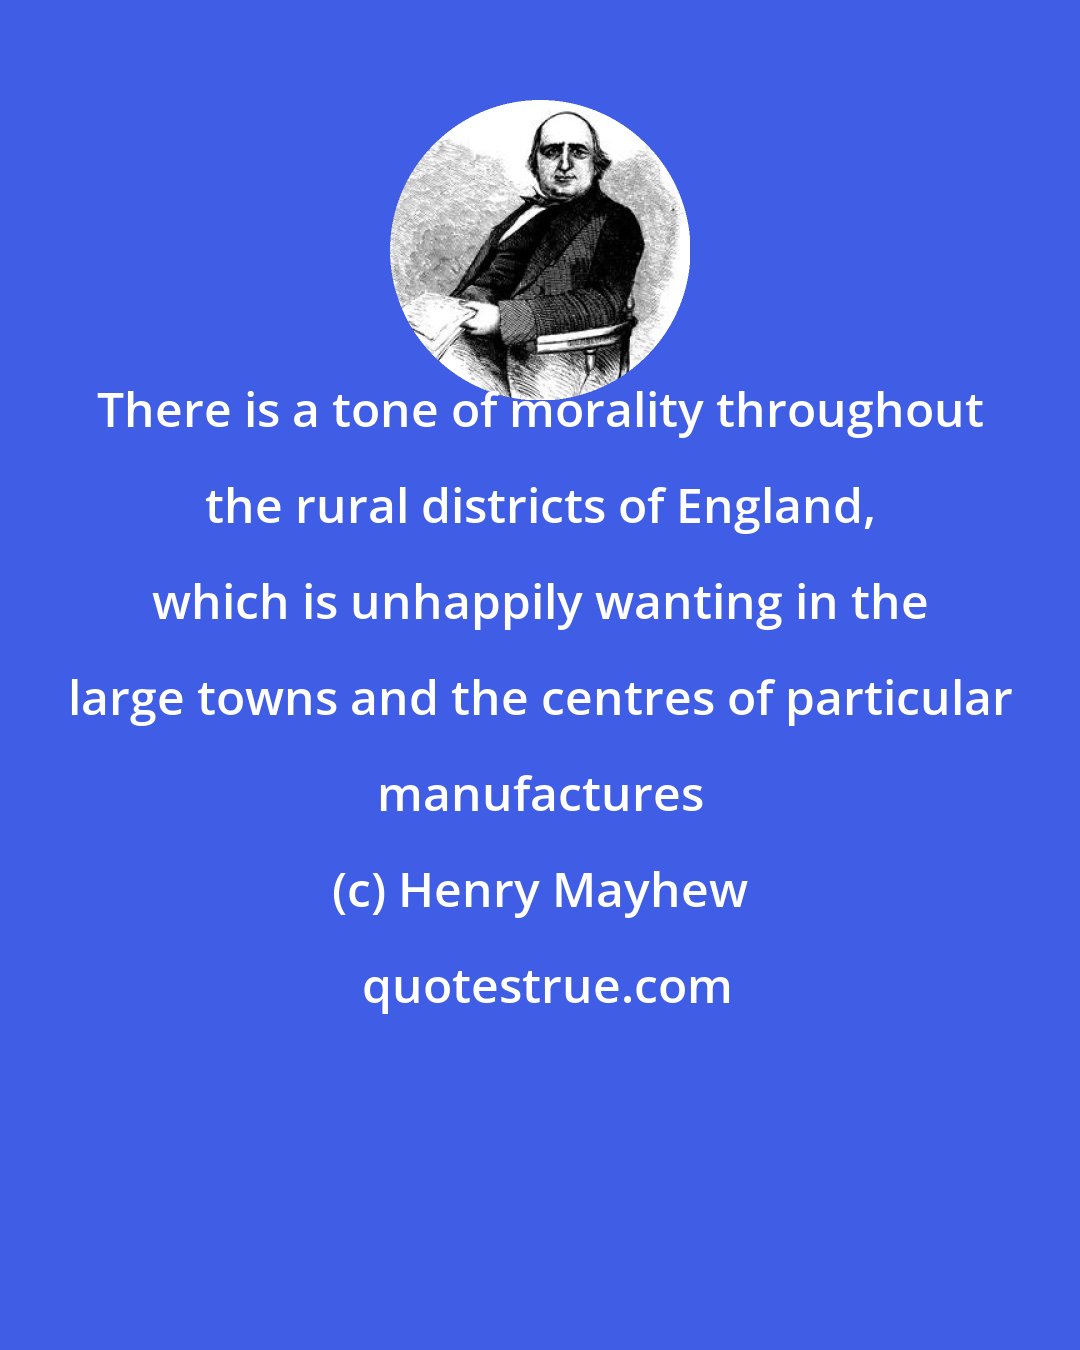 Henry Mayhew: There is a tone of morality throughout the rural districts of England, which is unhappily wanting in the large towns and the centres of particular manufactures